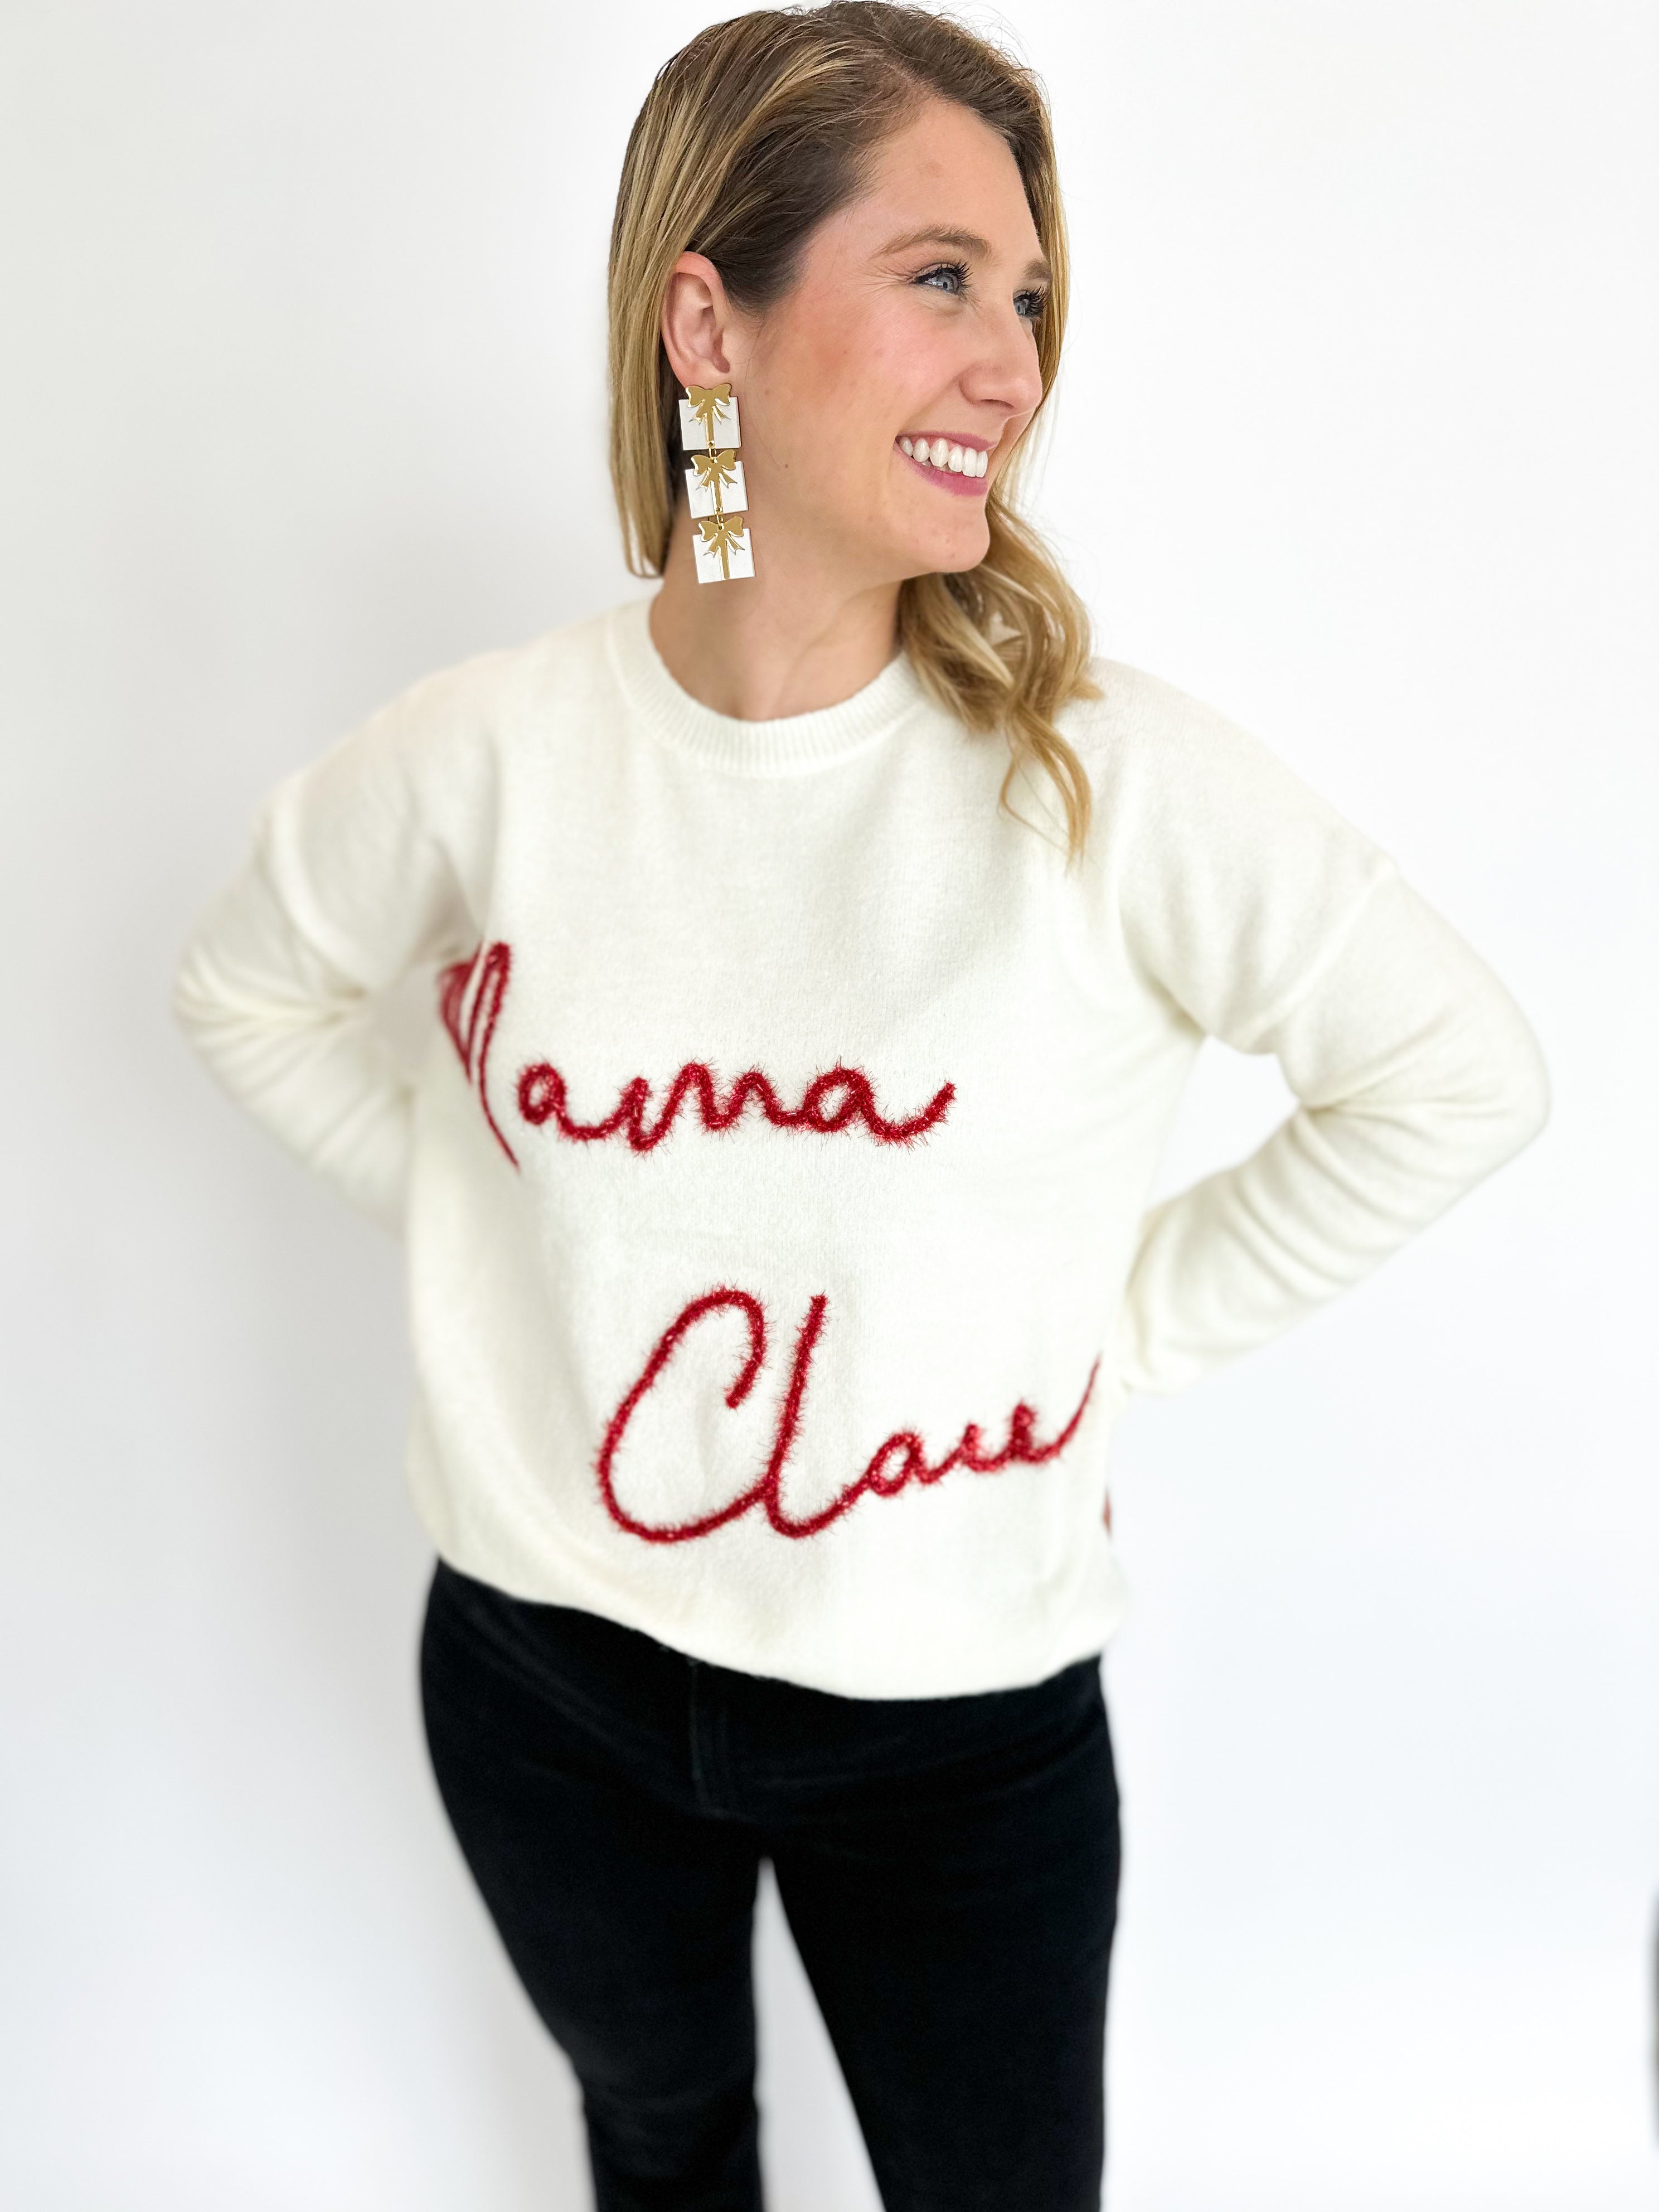 Mama Claus Sweater Top-230 Sweaters/Cardis-GILLI CLOTHING-July & June Women's Fashion Boutique Located in San Antonio, Texas